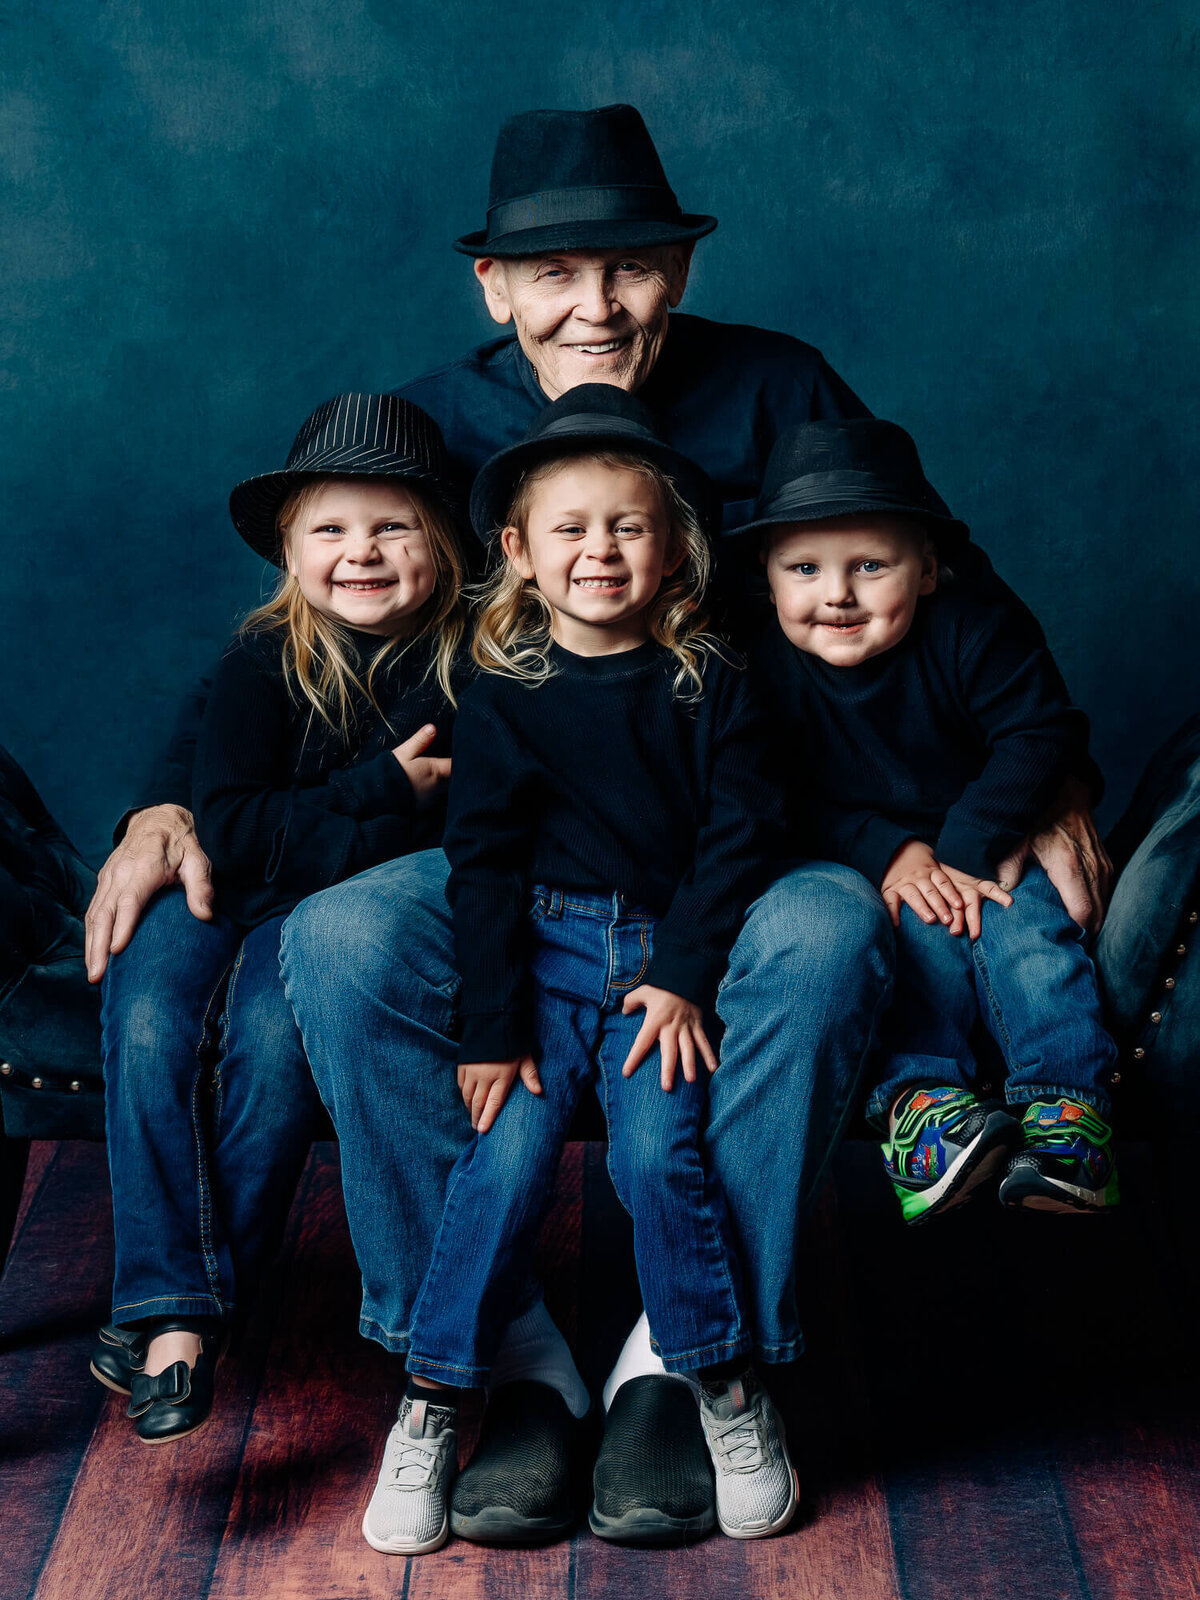 Grandfather poses with smiling kids in Prescott family photos